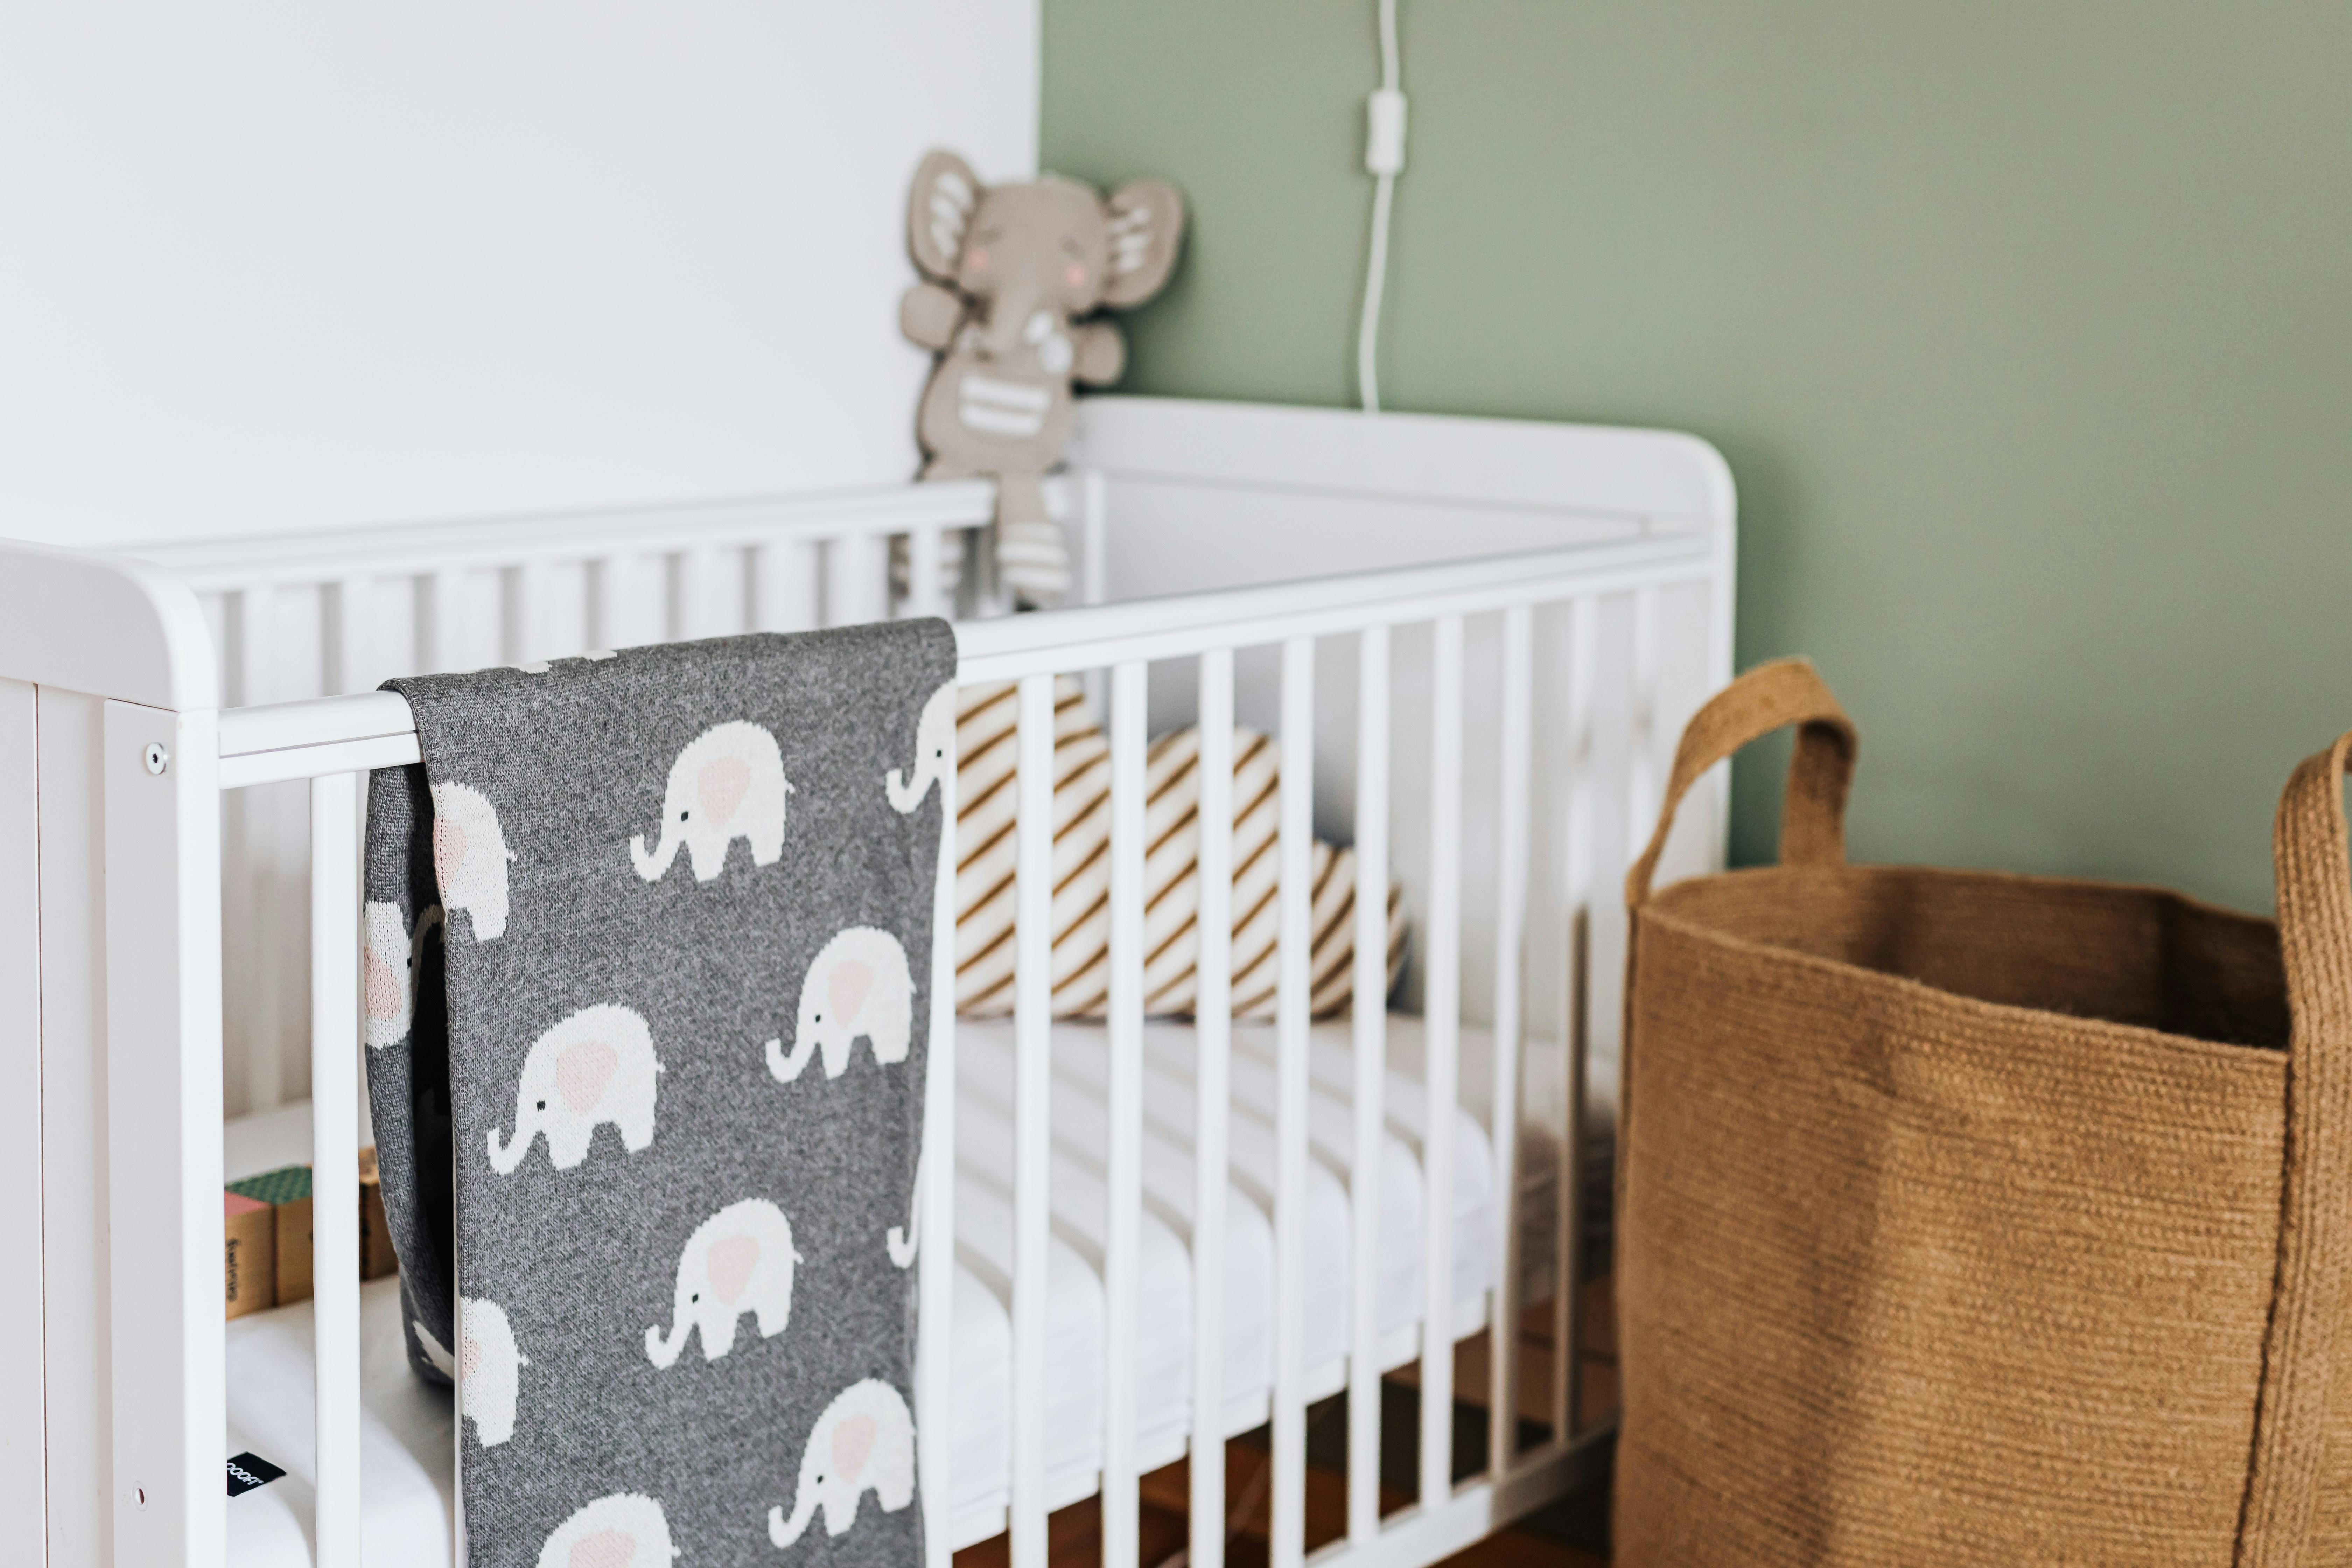 A cot in a baby's nursery | Source: Pexels